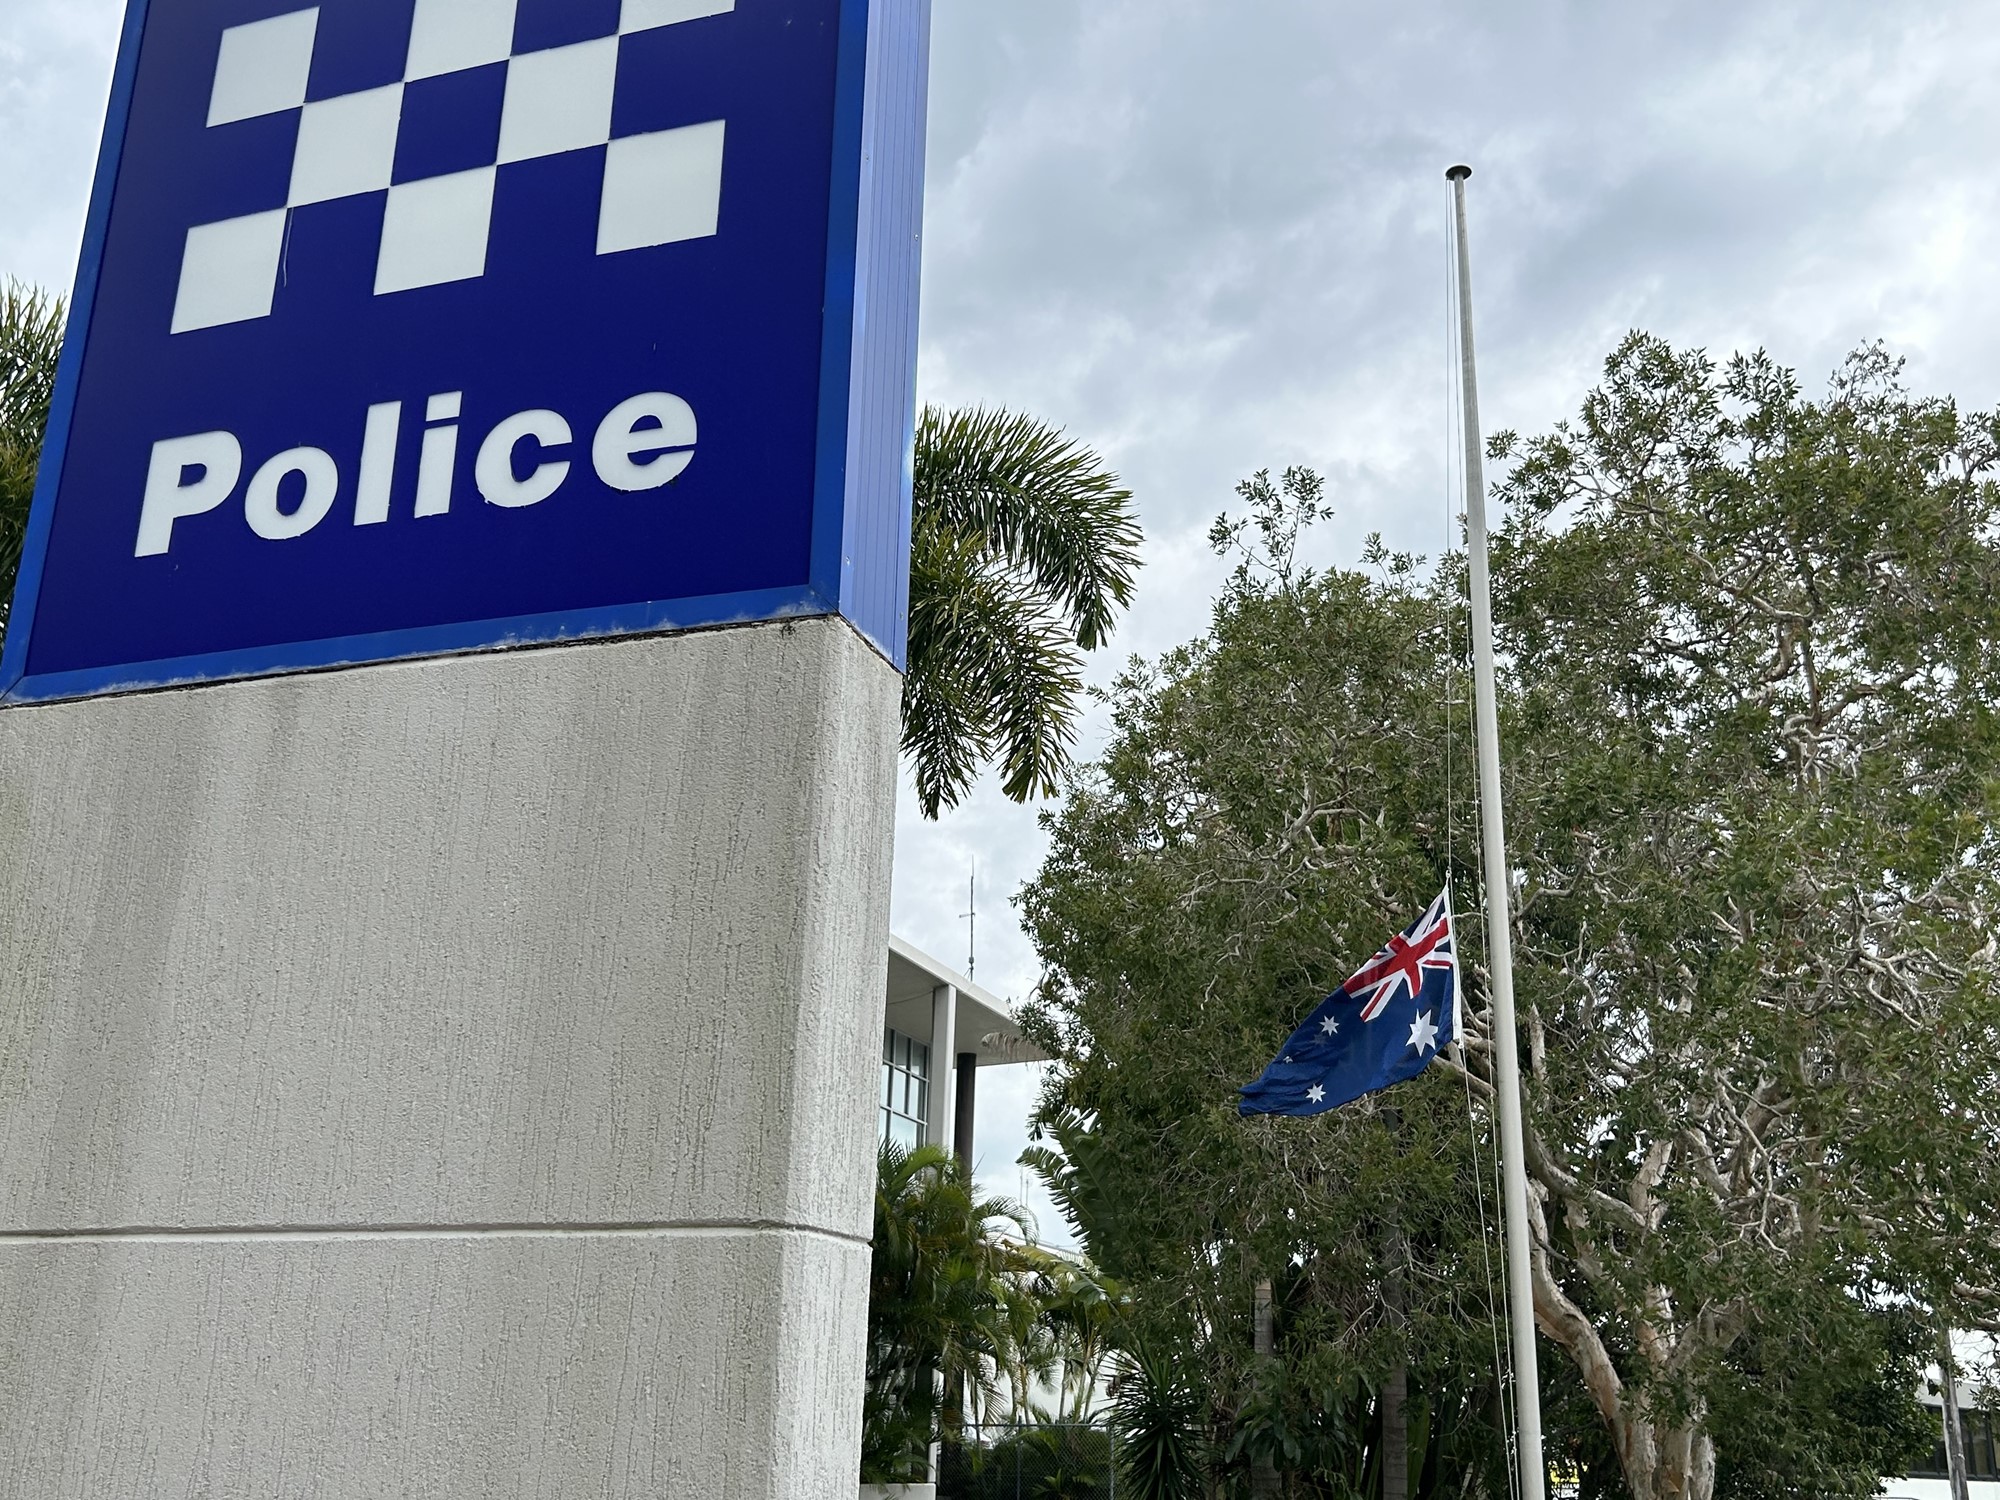 The flag outside a police station flies at half mast. 